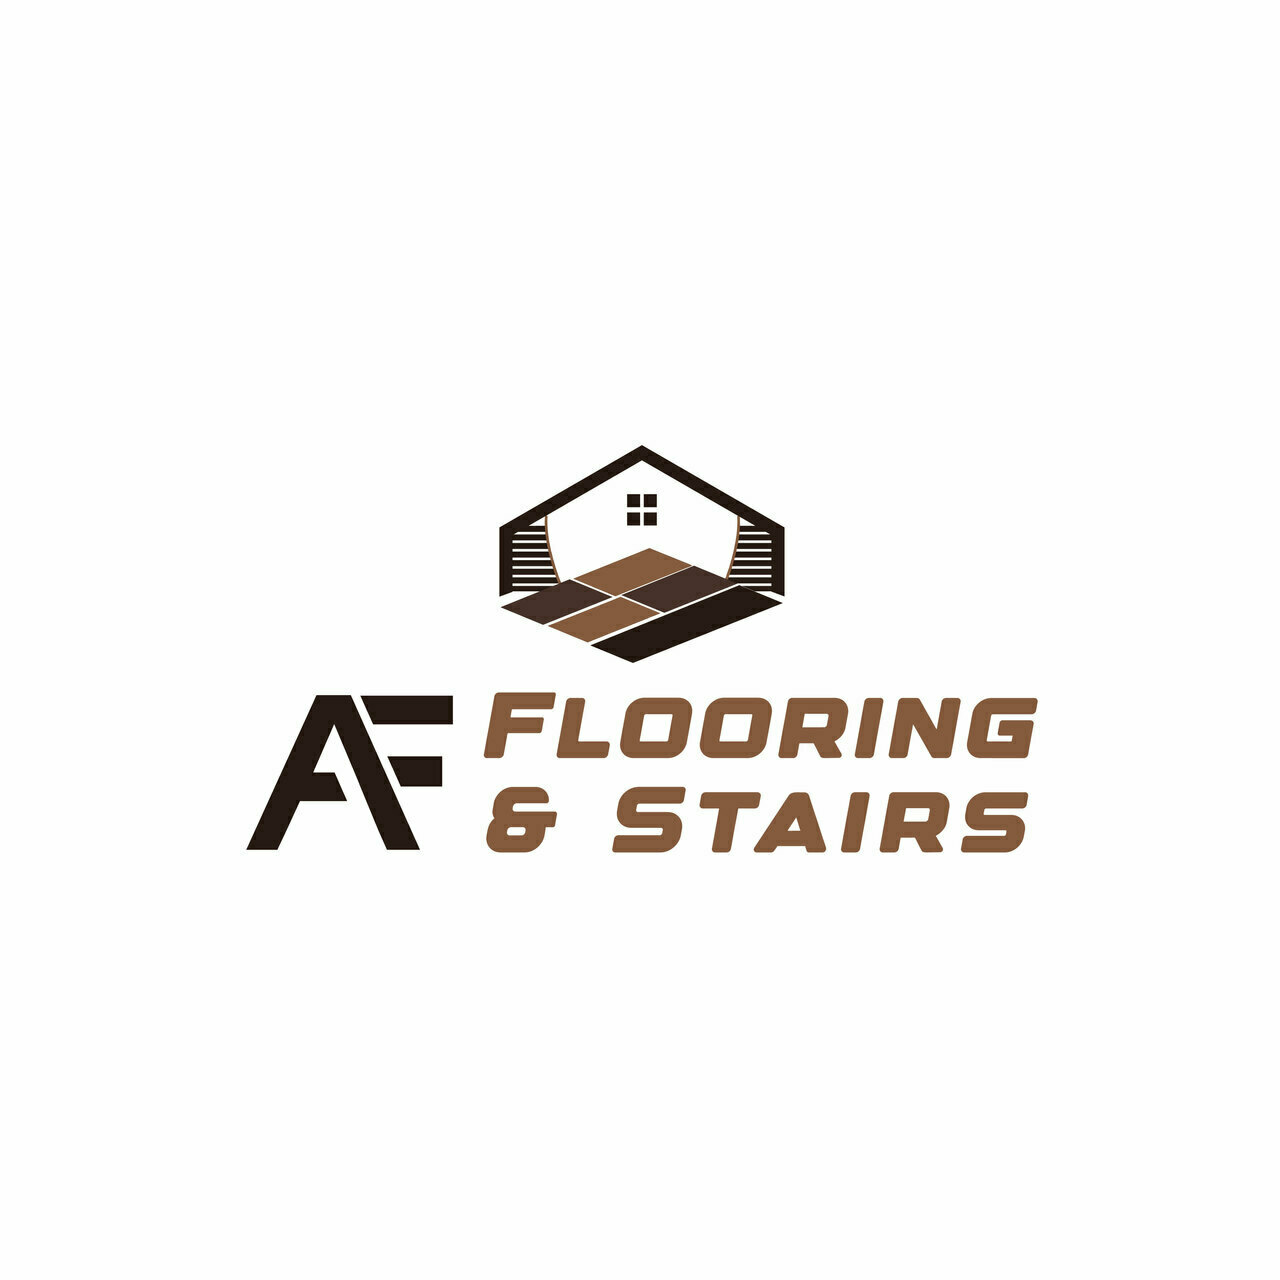 AF Flooring and Stairs INC's logo